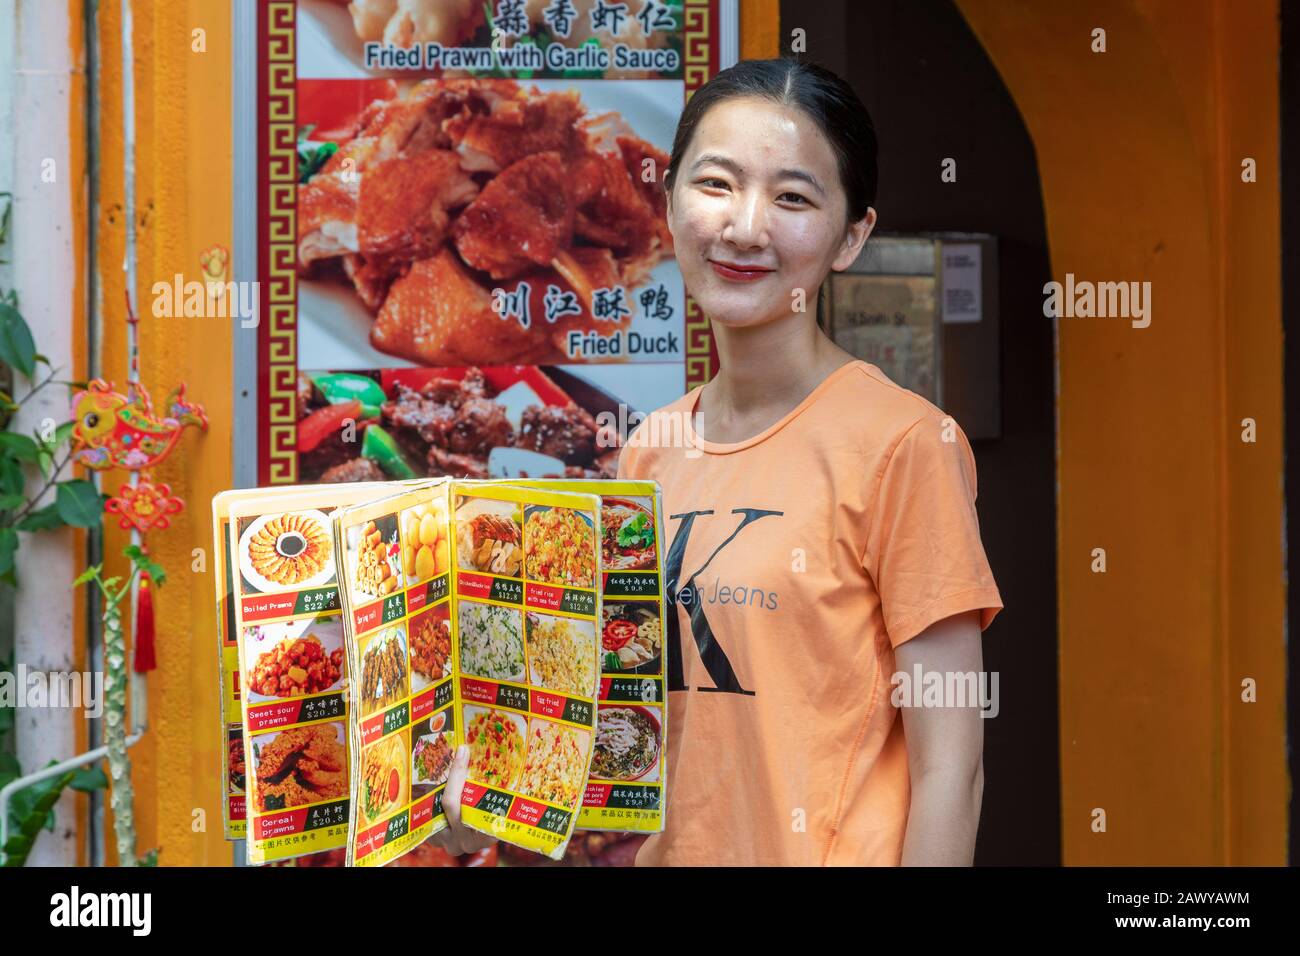 Young woman working as a waitress displaying a menu from the restaurant she works in, Chinatown, Singapore, Asia Stock Photo